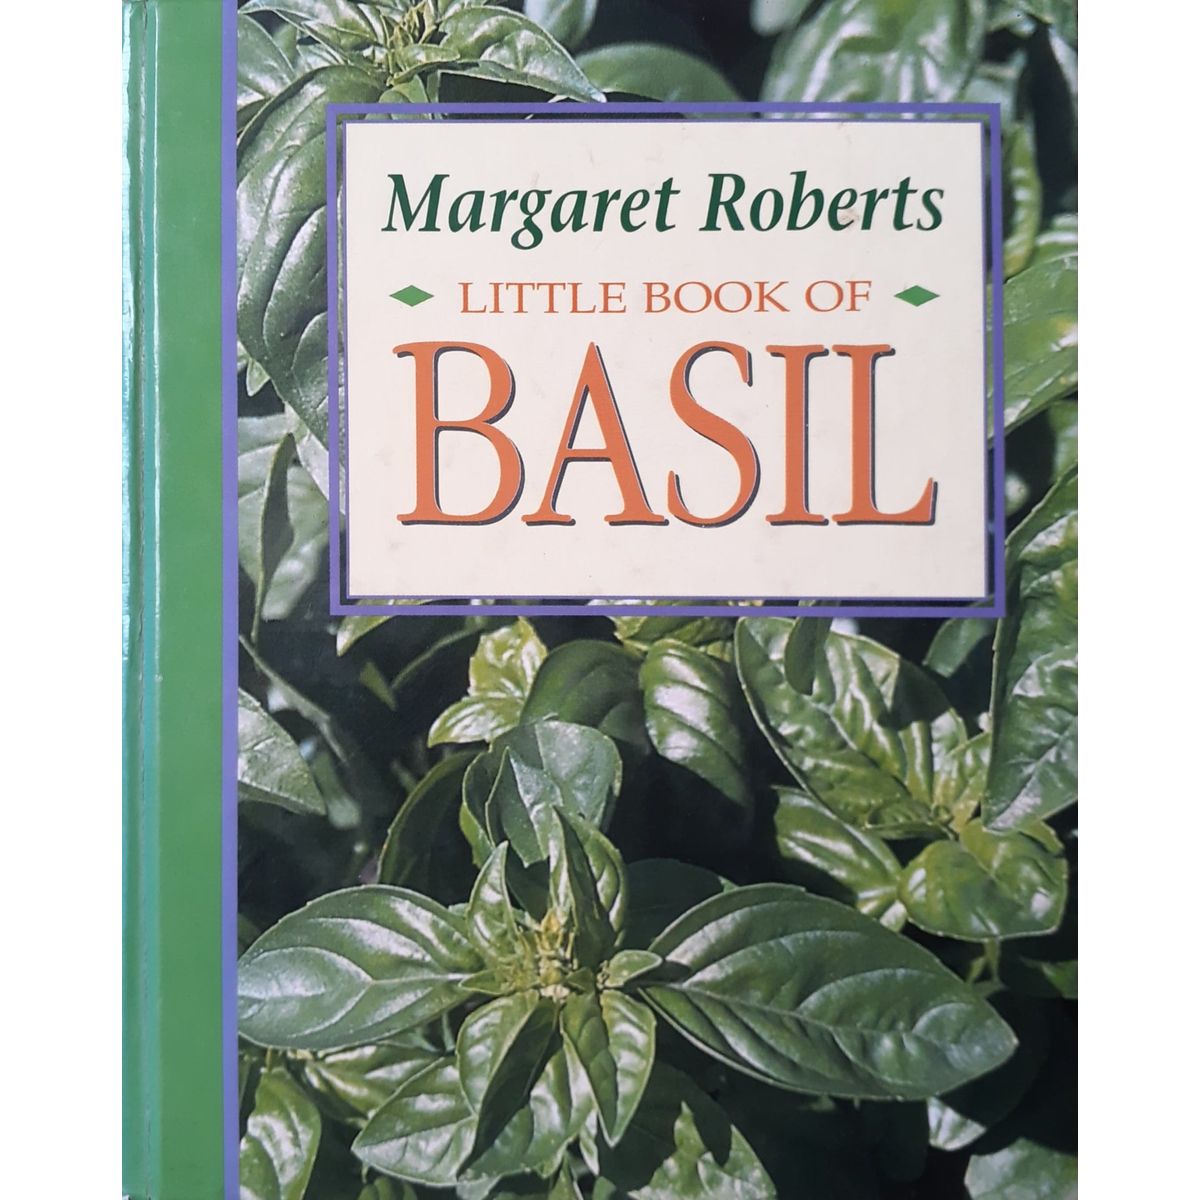 ISBN: 9781868126712 / 1868126714 - Margaret Roberts Little Book of Basil by Margaret Roberts, 1st Edition [1997]